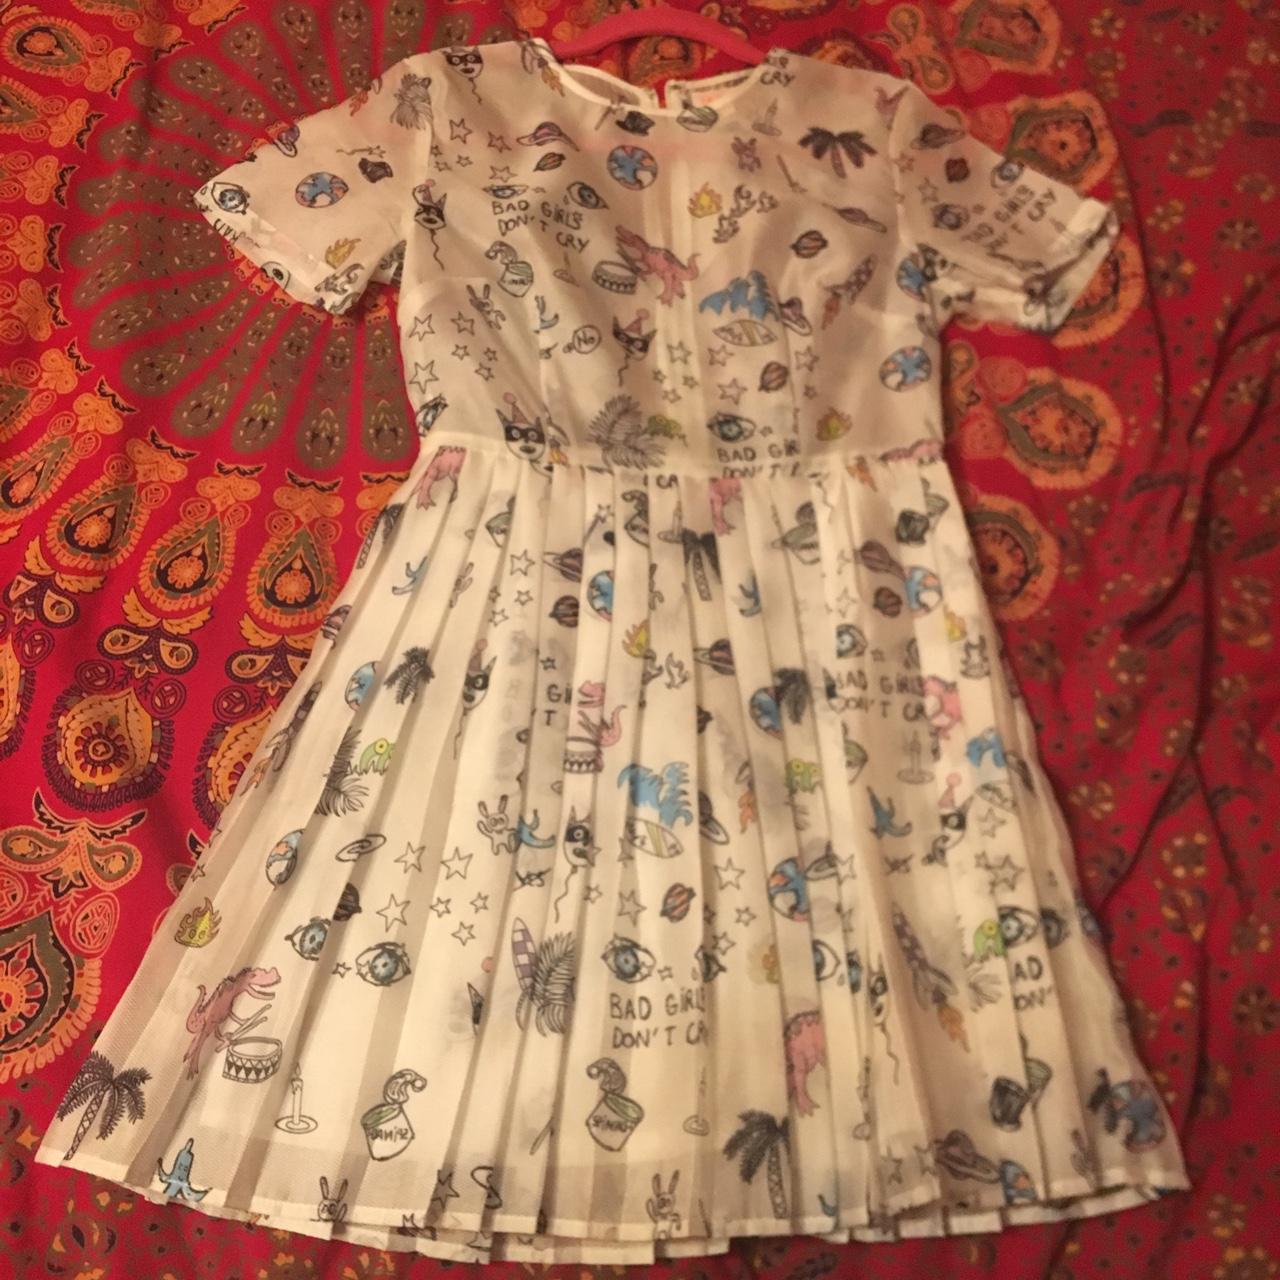 Worn only once in 2014, I originally bought this - Depop